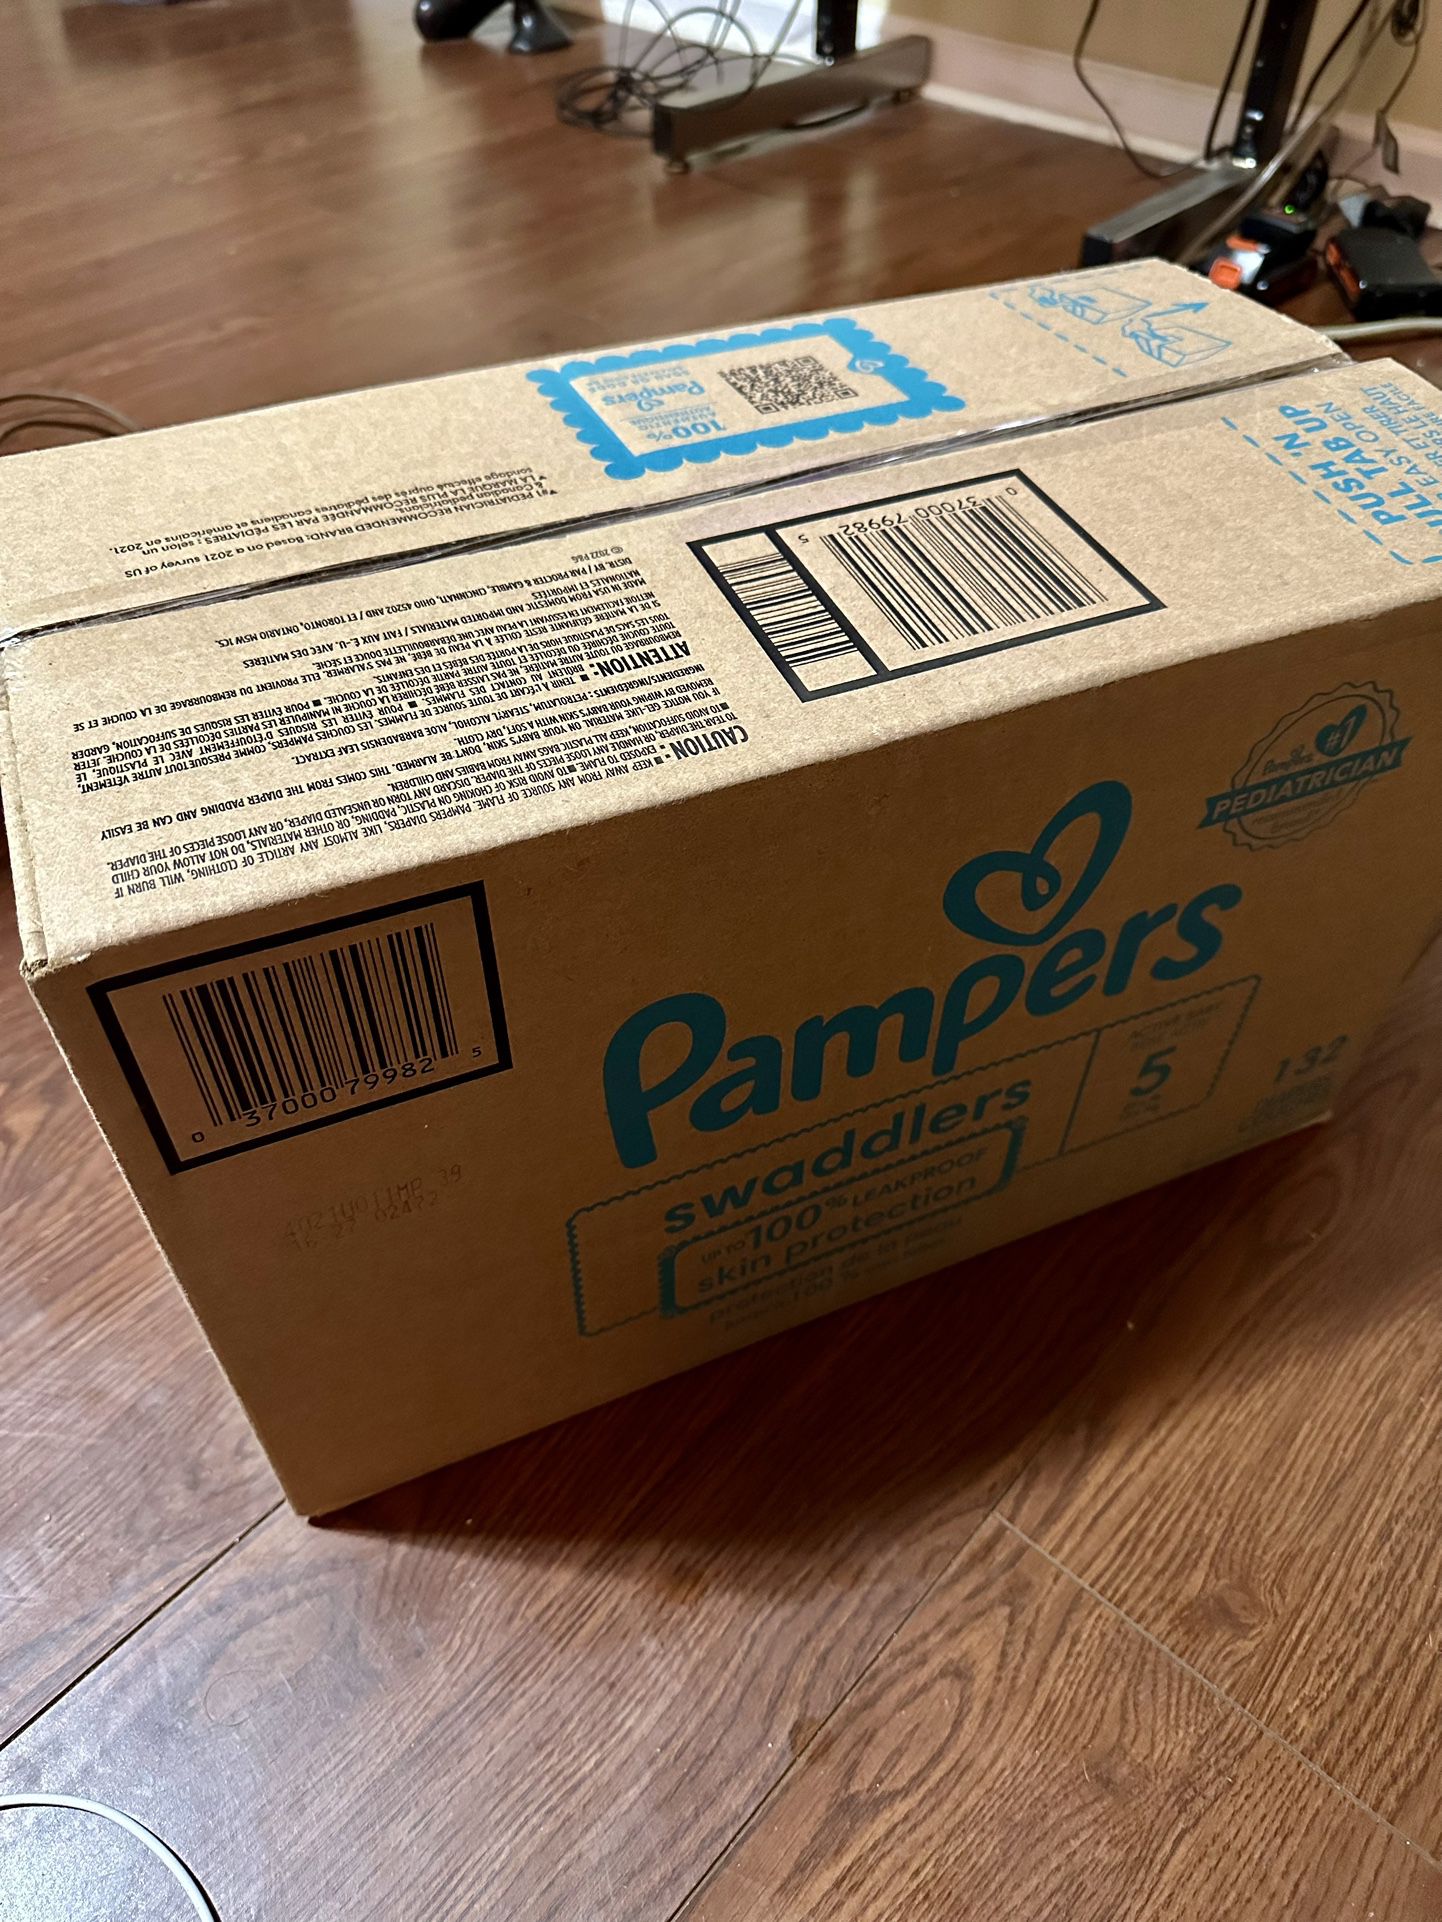 New Pampers Swaddlers Diapers - Size 5, One Month Supply (132 Count), Ultra Soft Disposable Baby Diapers